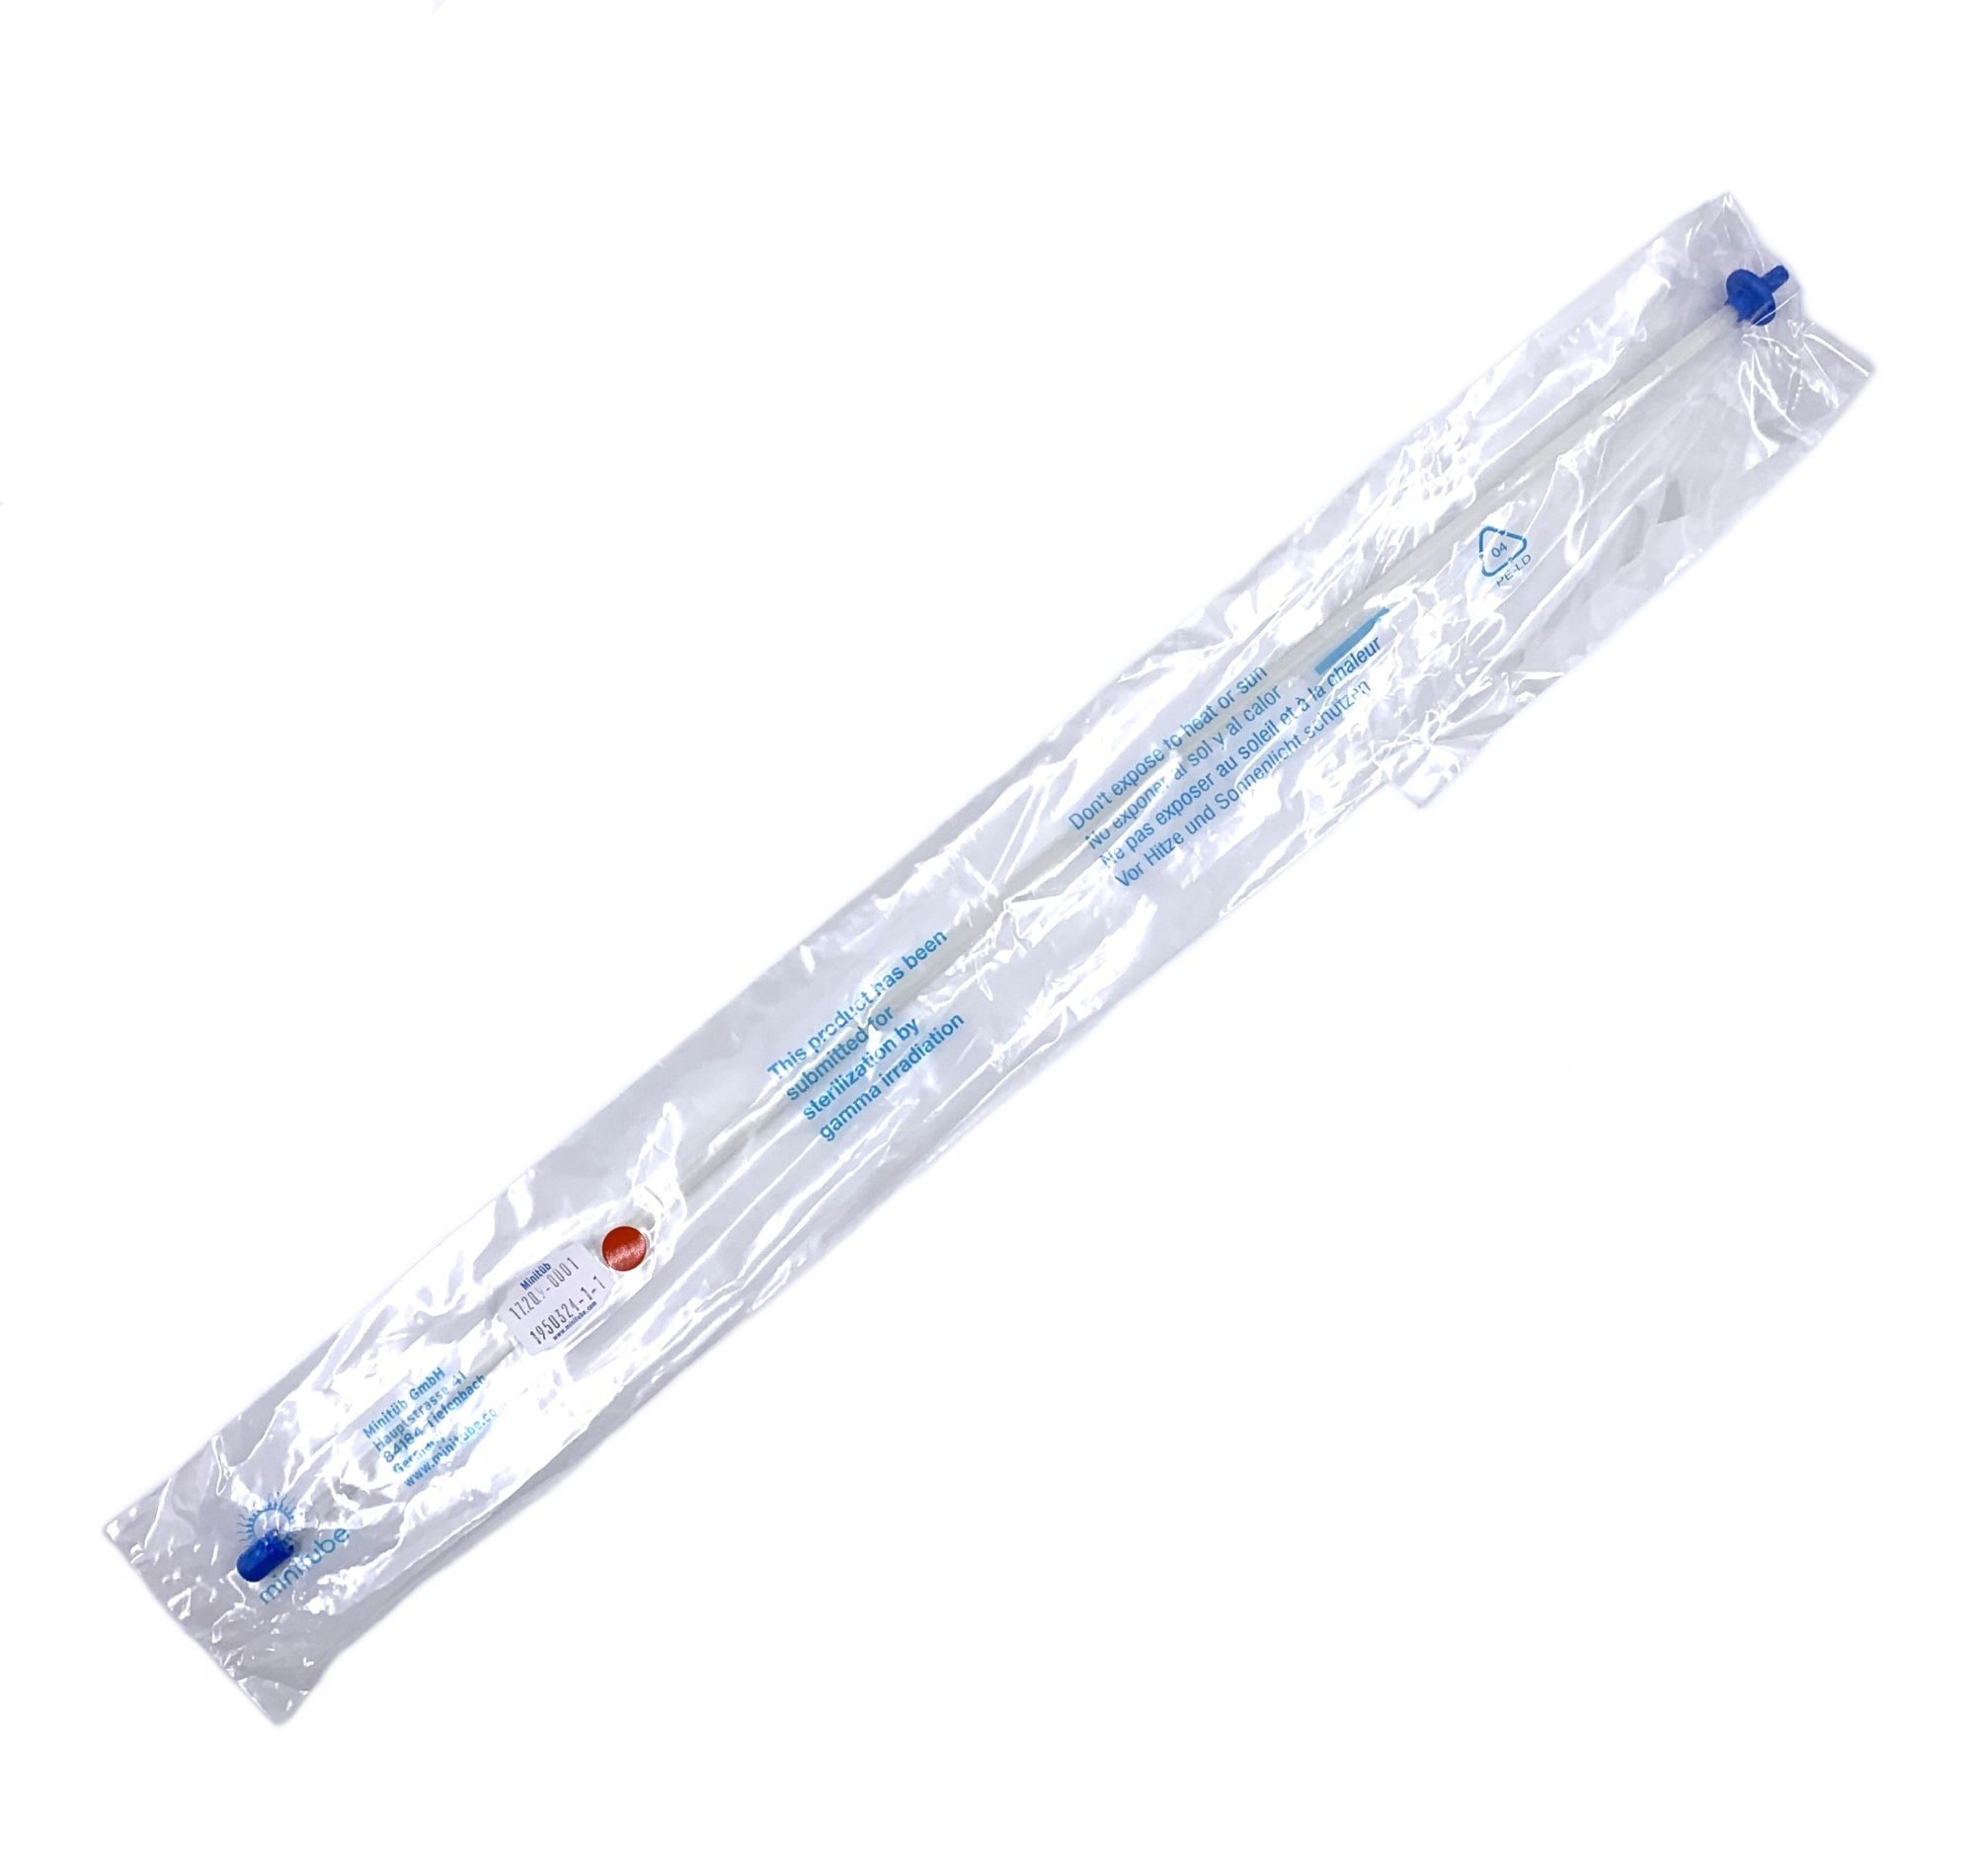 insemination catheter sterile 57cm long packed per piece